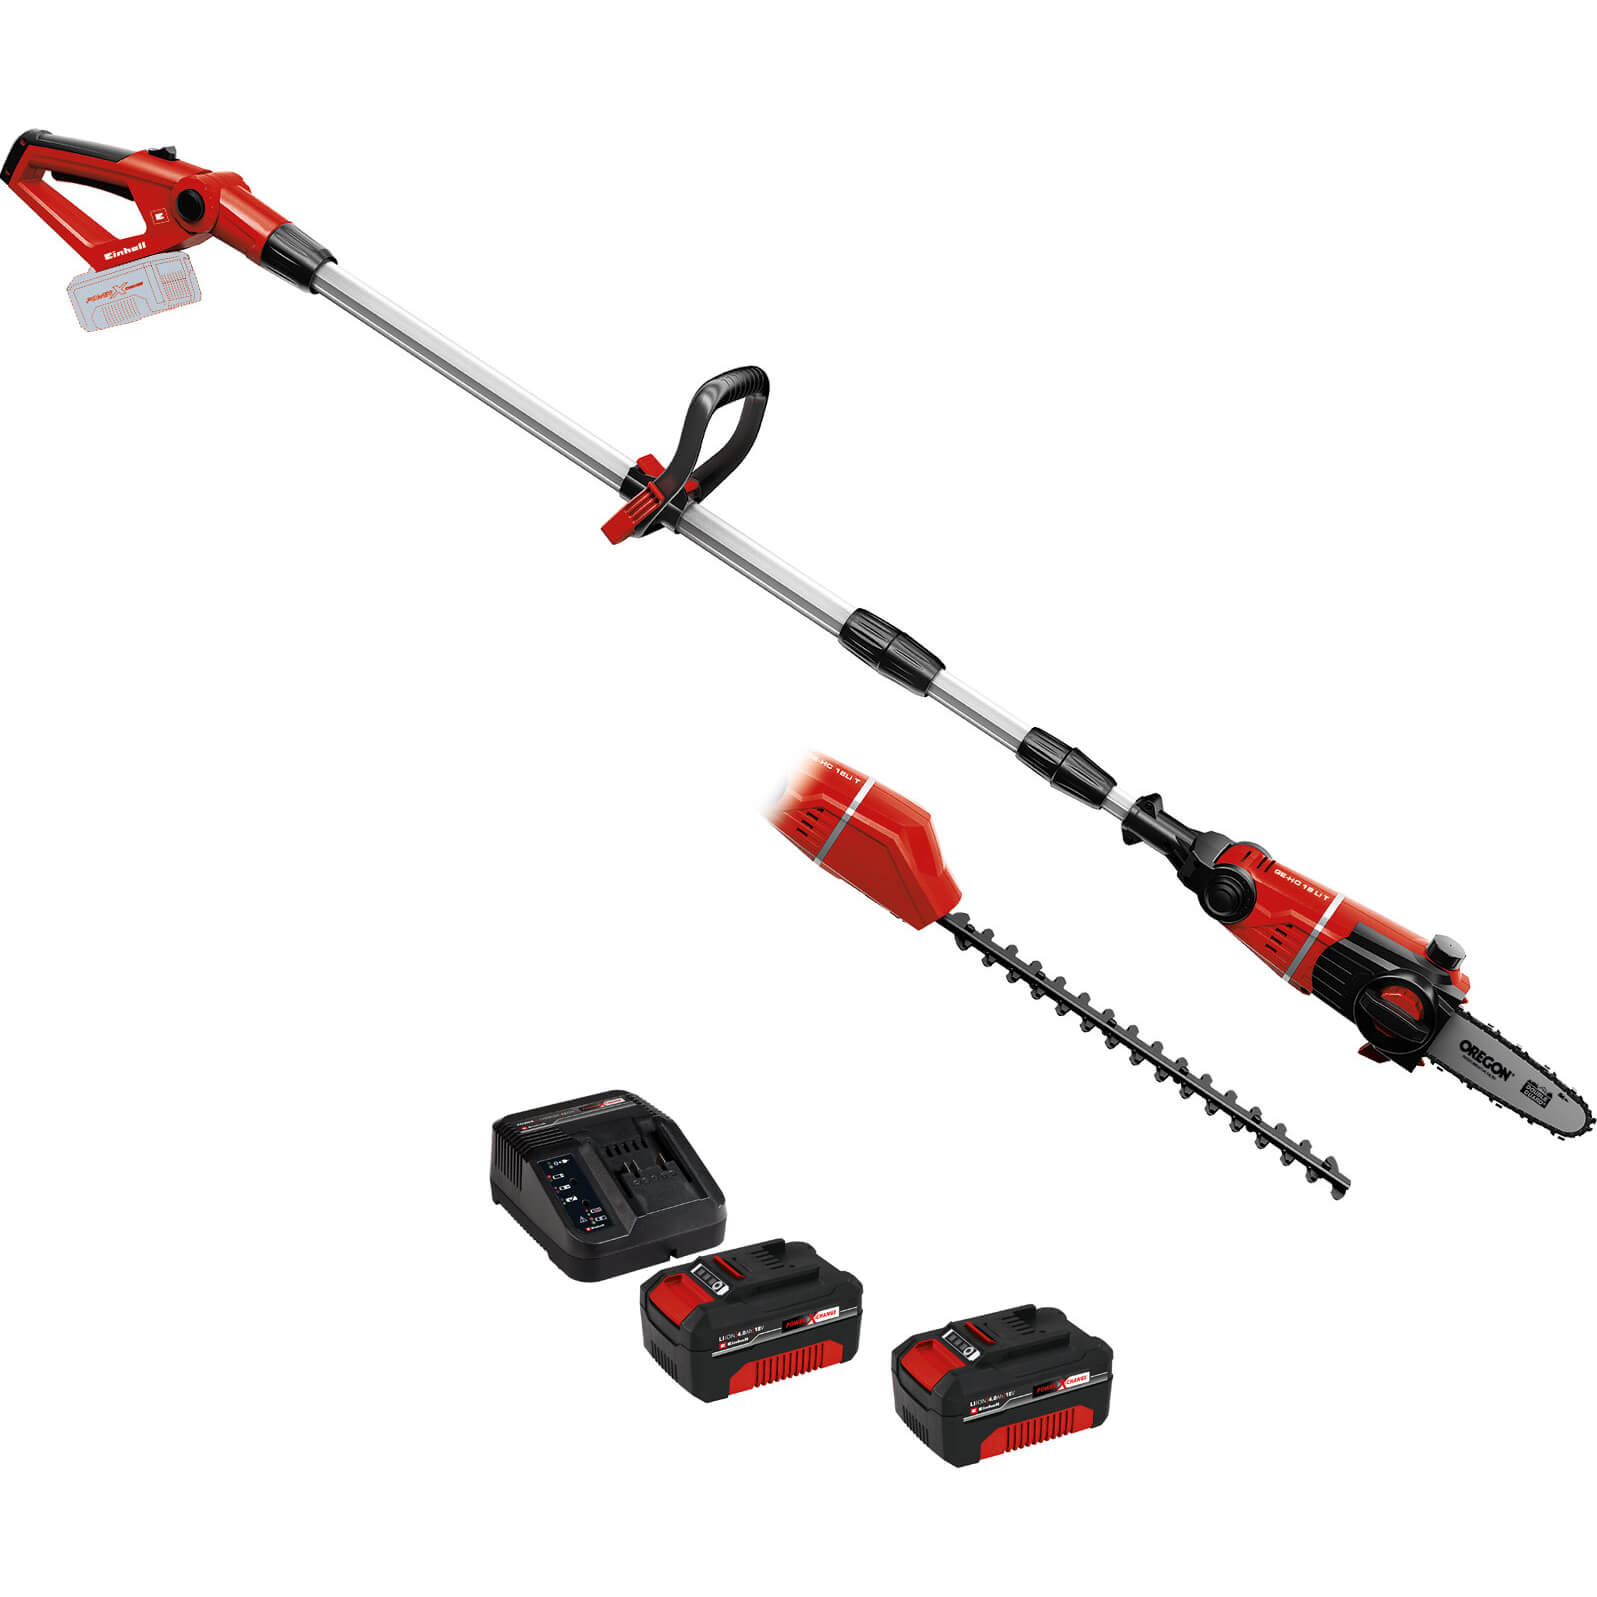 Einhell GE-HC 18 Li T 18v Cordless Telescopic Pole Pruner and Hedge Trimmer 2 x 4ah Li-ion Charger